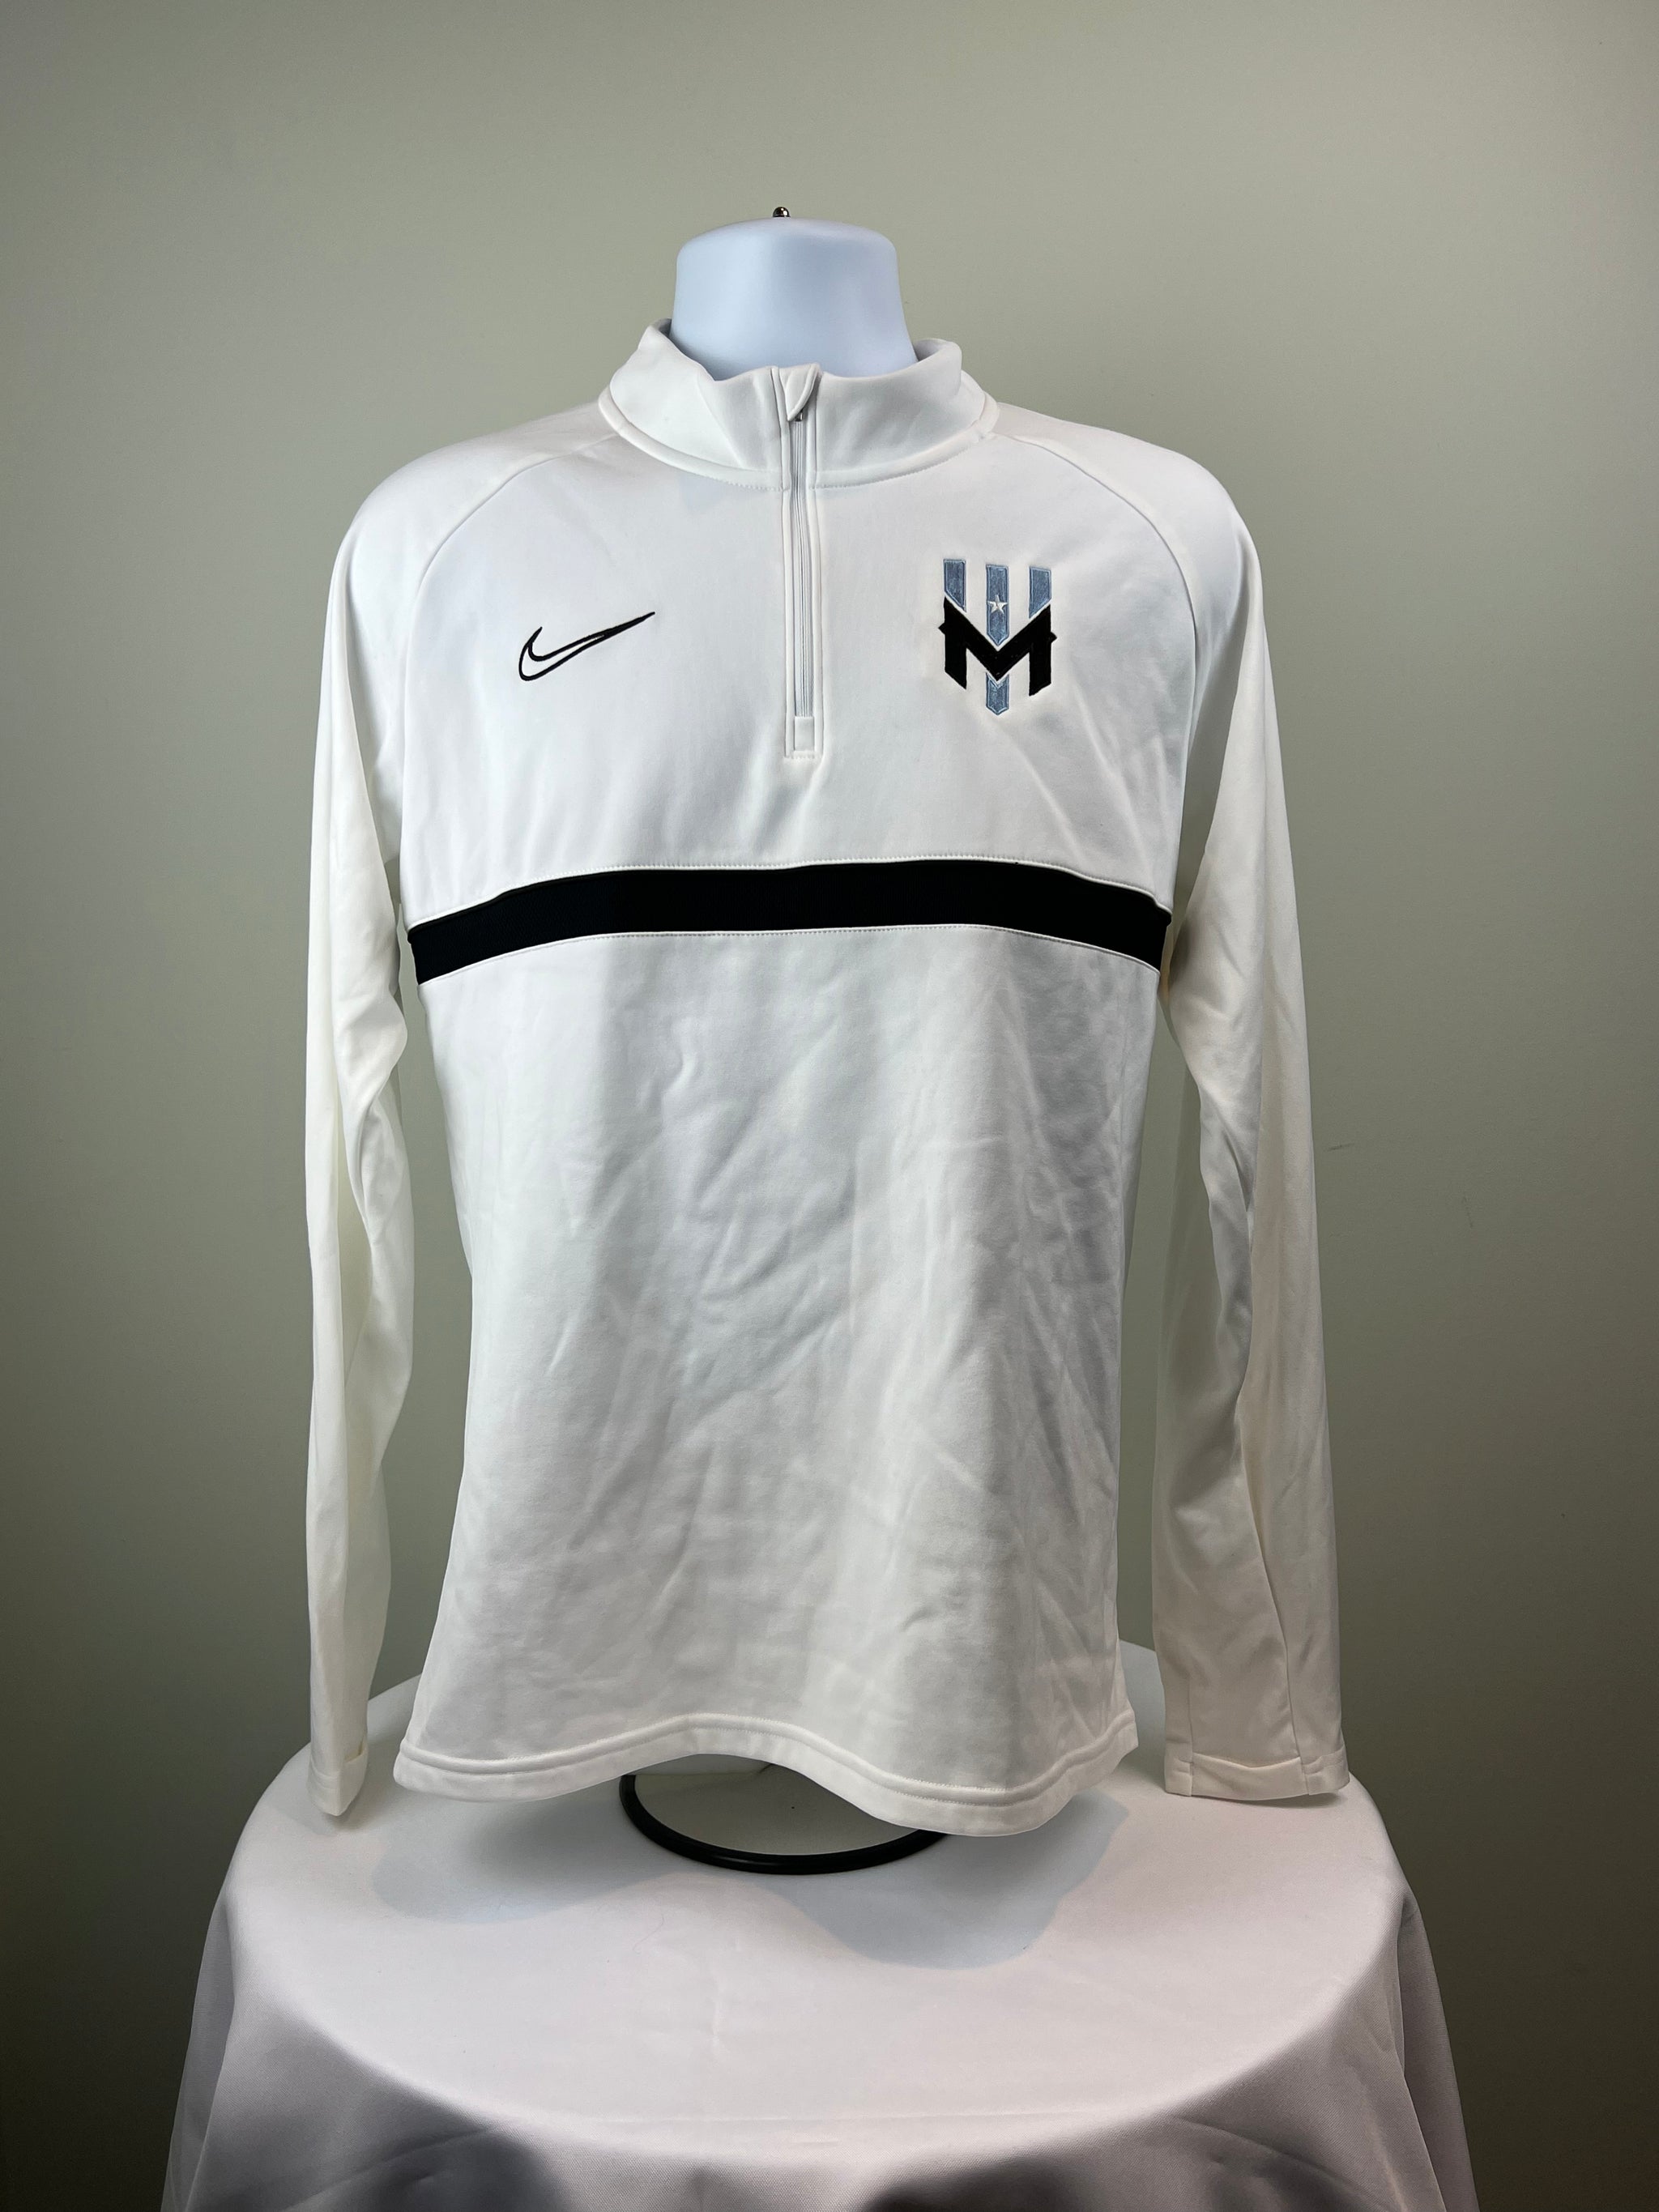 Wind Chill Warm-Up Jacket - Nike Academy 21 Drill Top